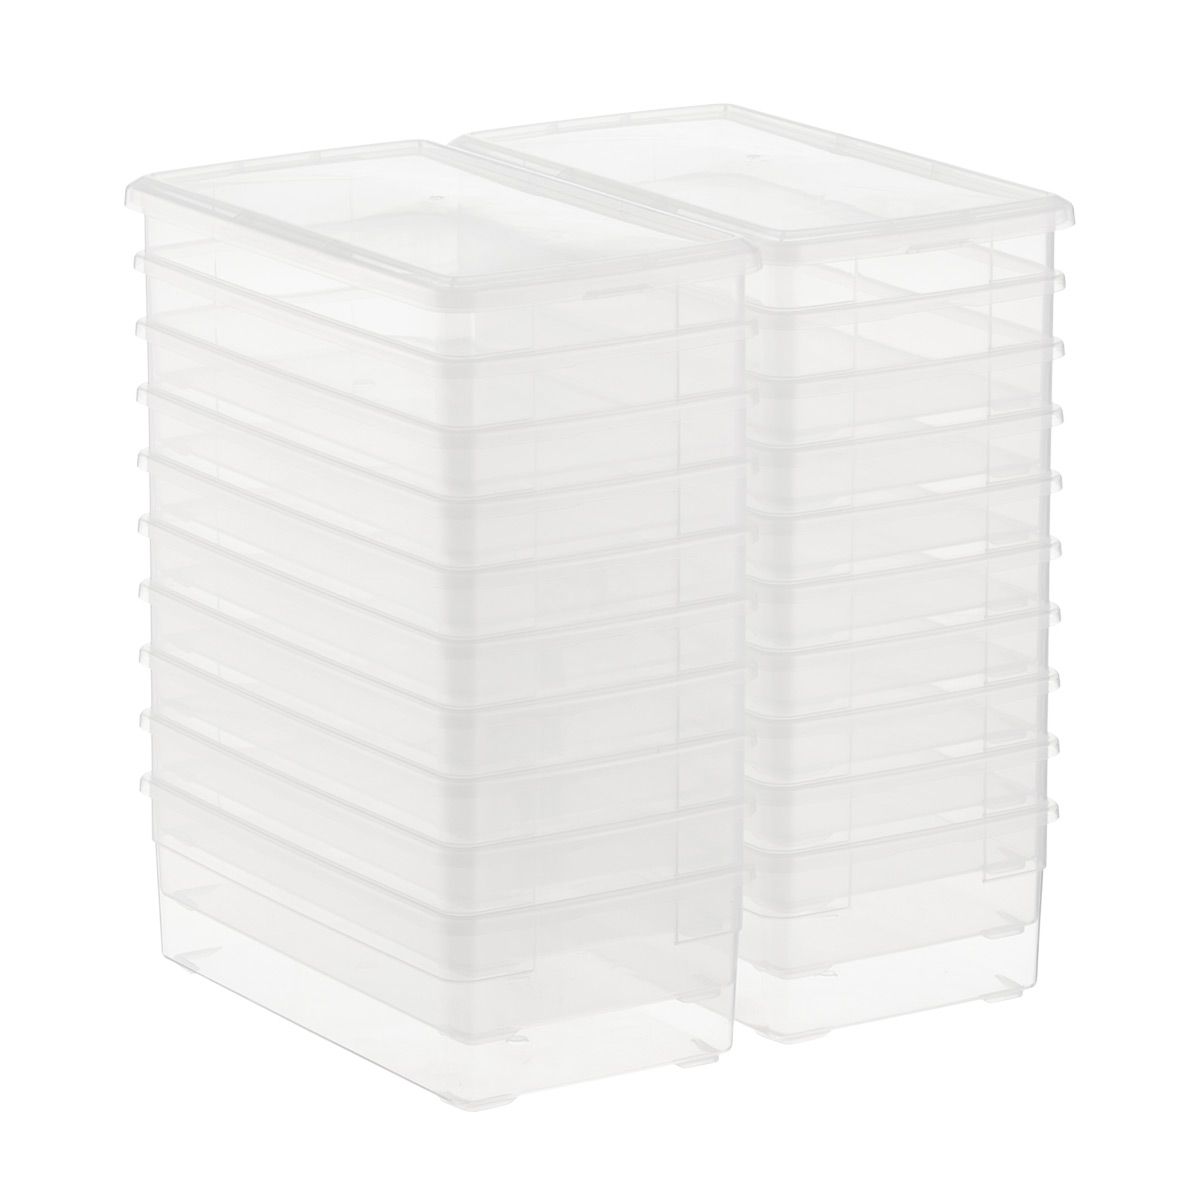 Case of 20 Our Shoe Box | The Container Store